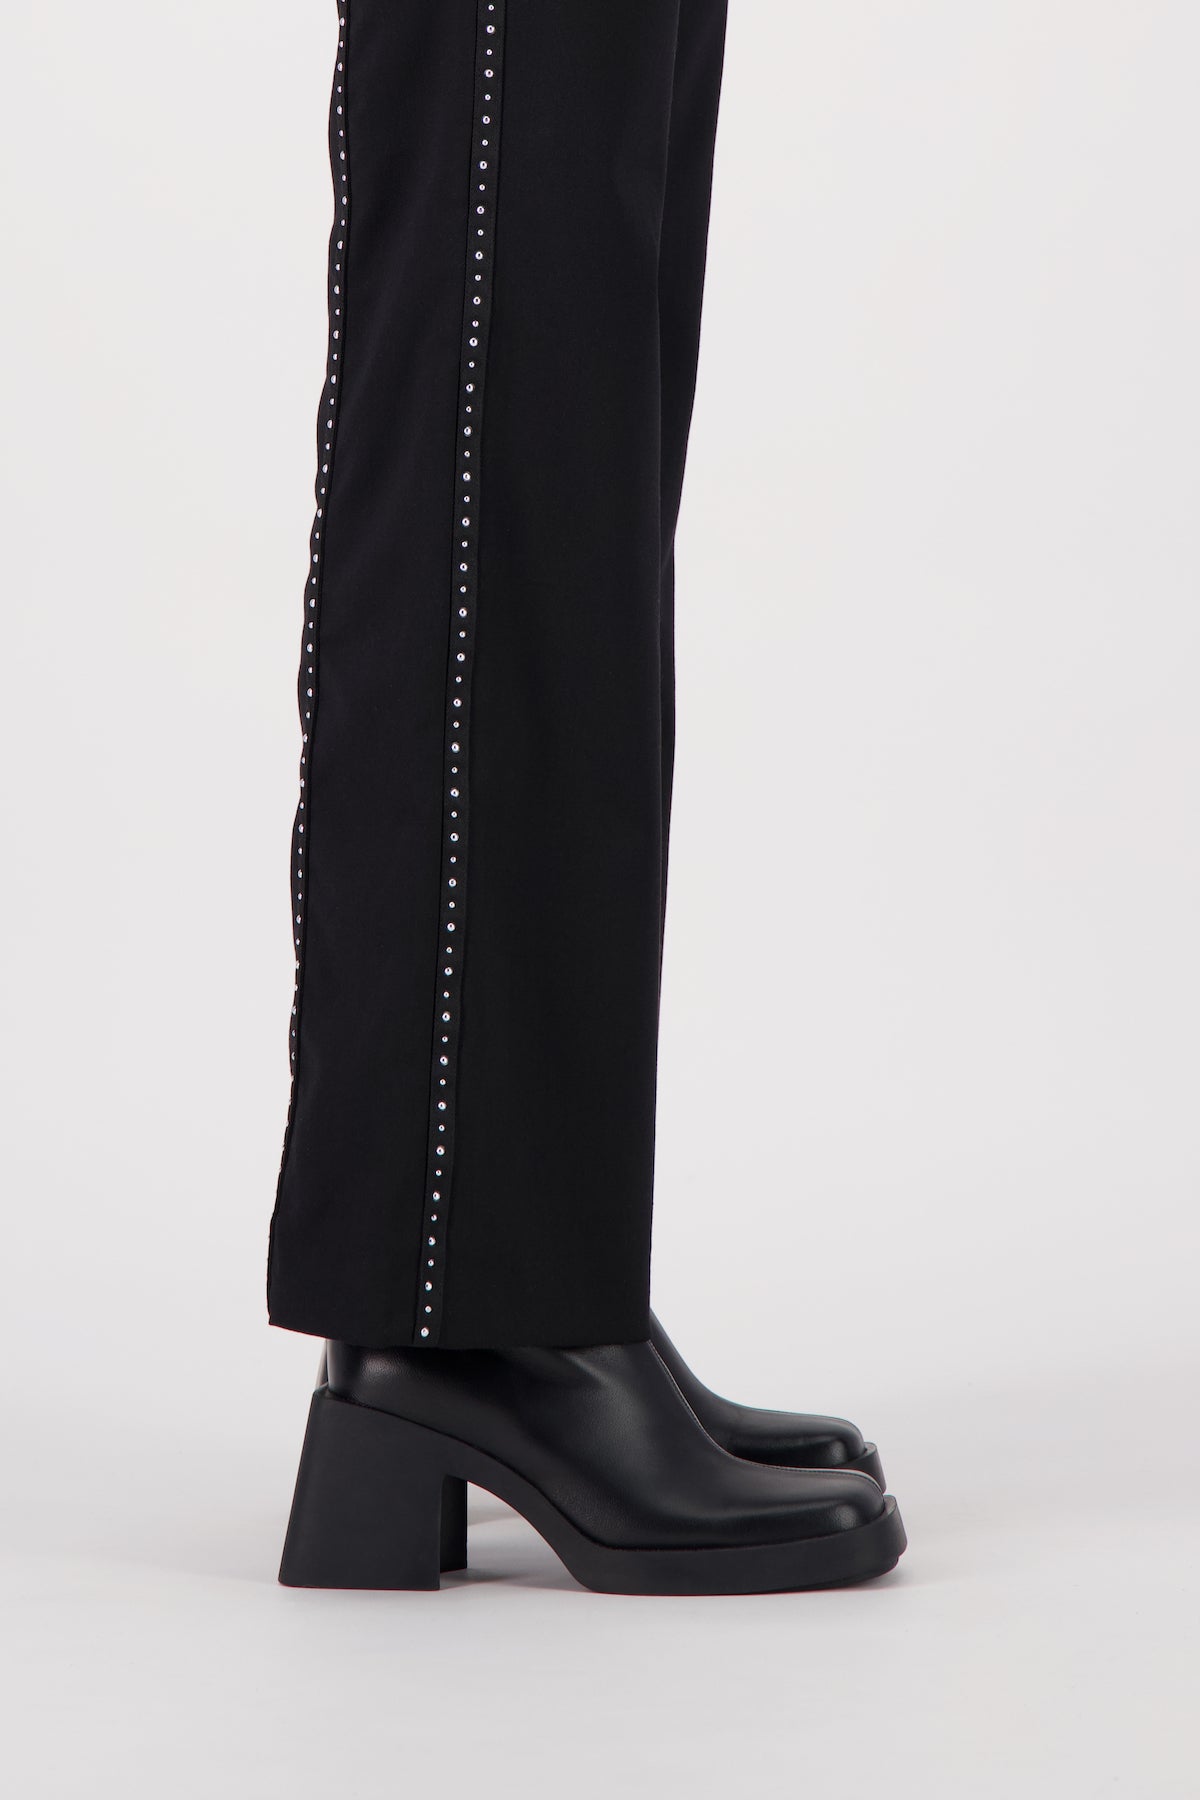 Milla black ankle boots